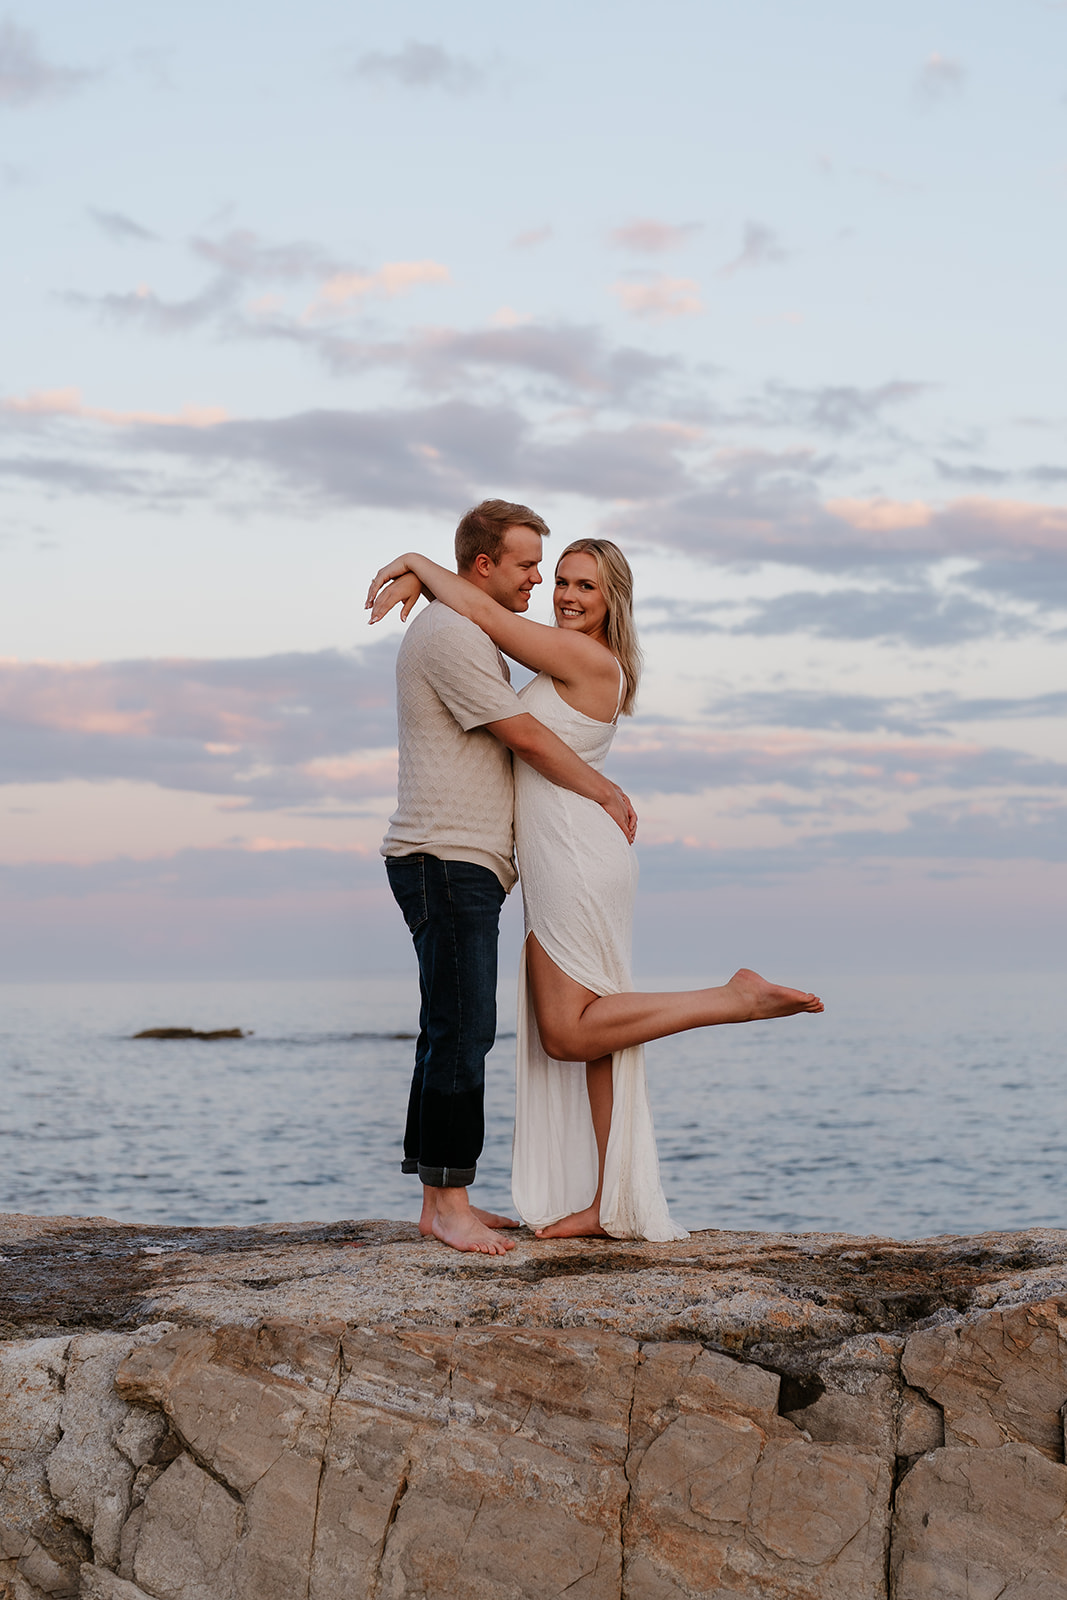 A couple playfully posing on a rocky coastline, with a woman in a white dress extending her arms like wings and a man in jeans behind her, both smiling at their beach engagement session